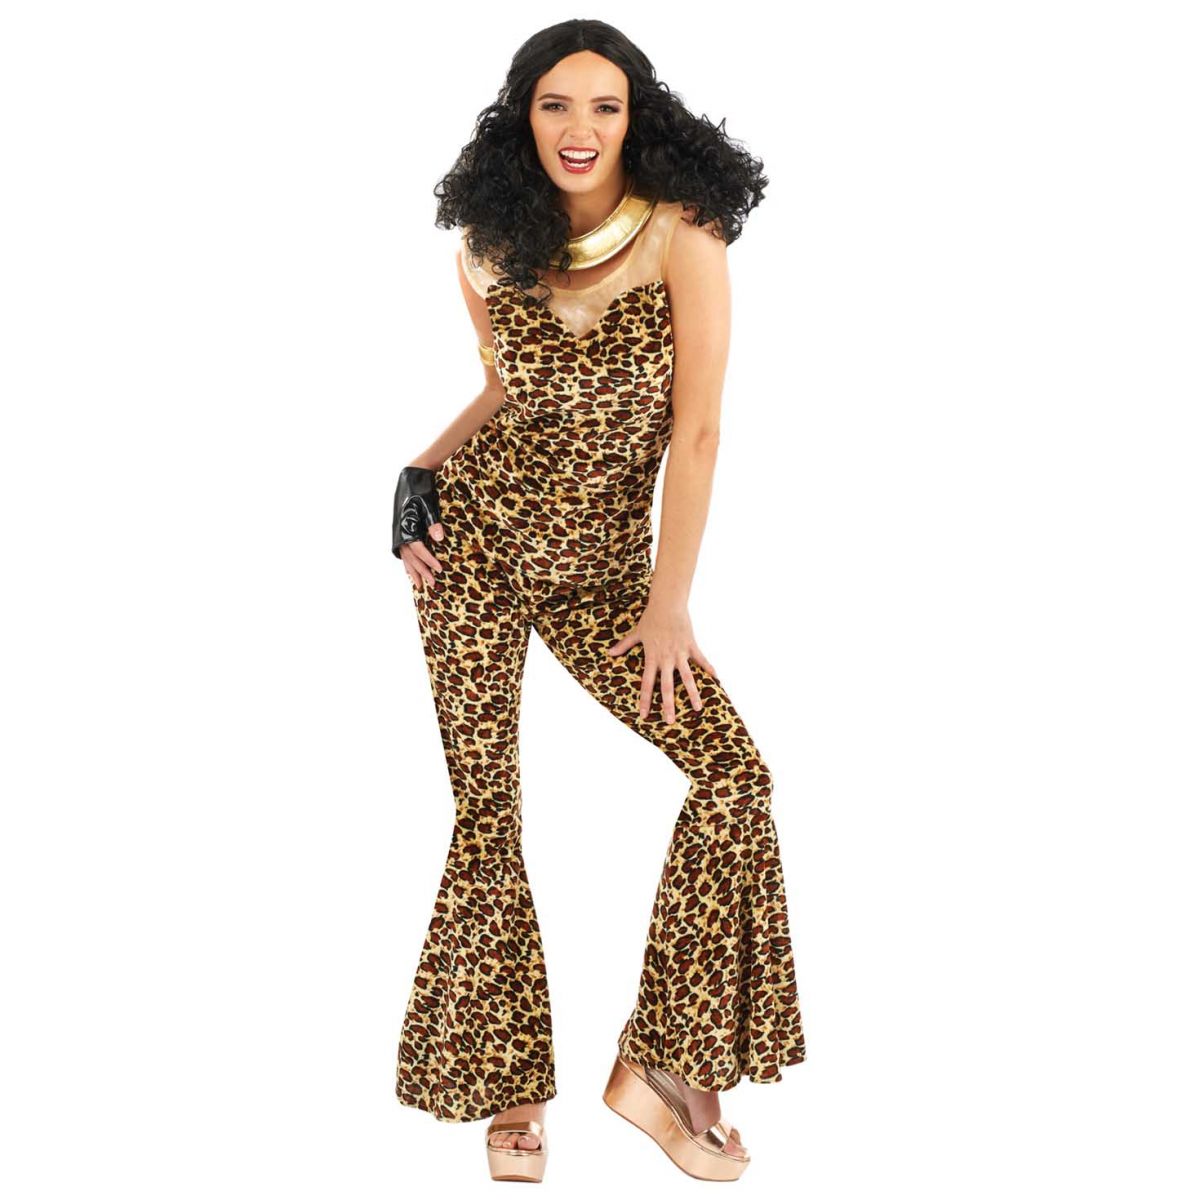 WOMAN/DECADES/1990S/WOMENS 90S SCARY LEOPARD POPSTAR COSTUME